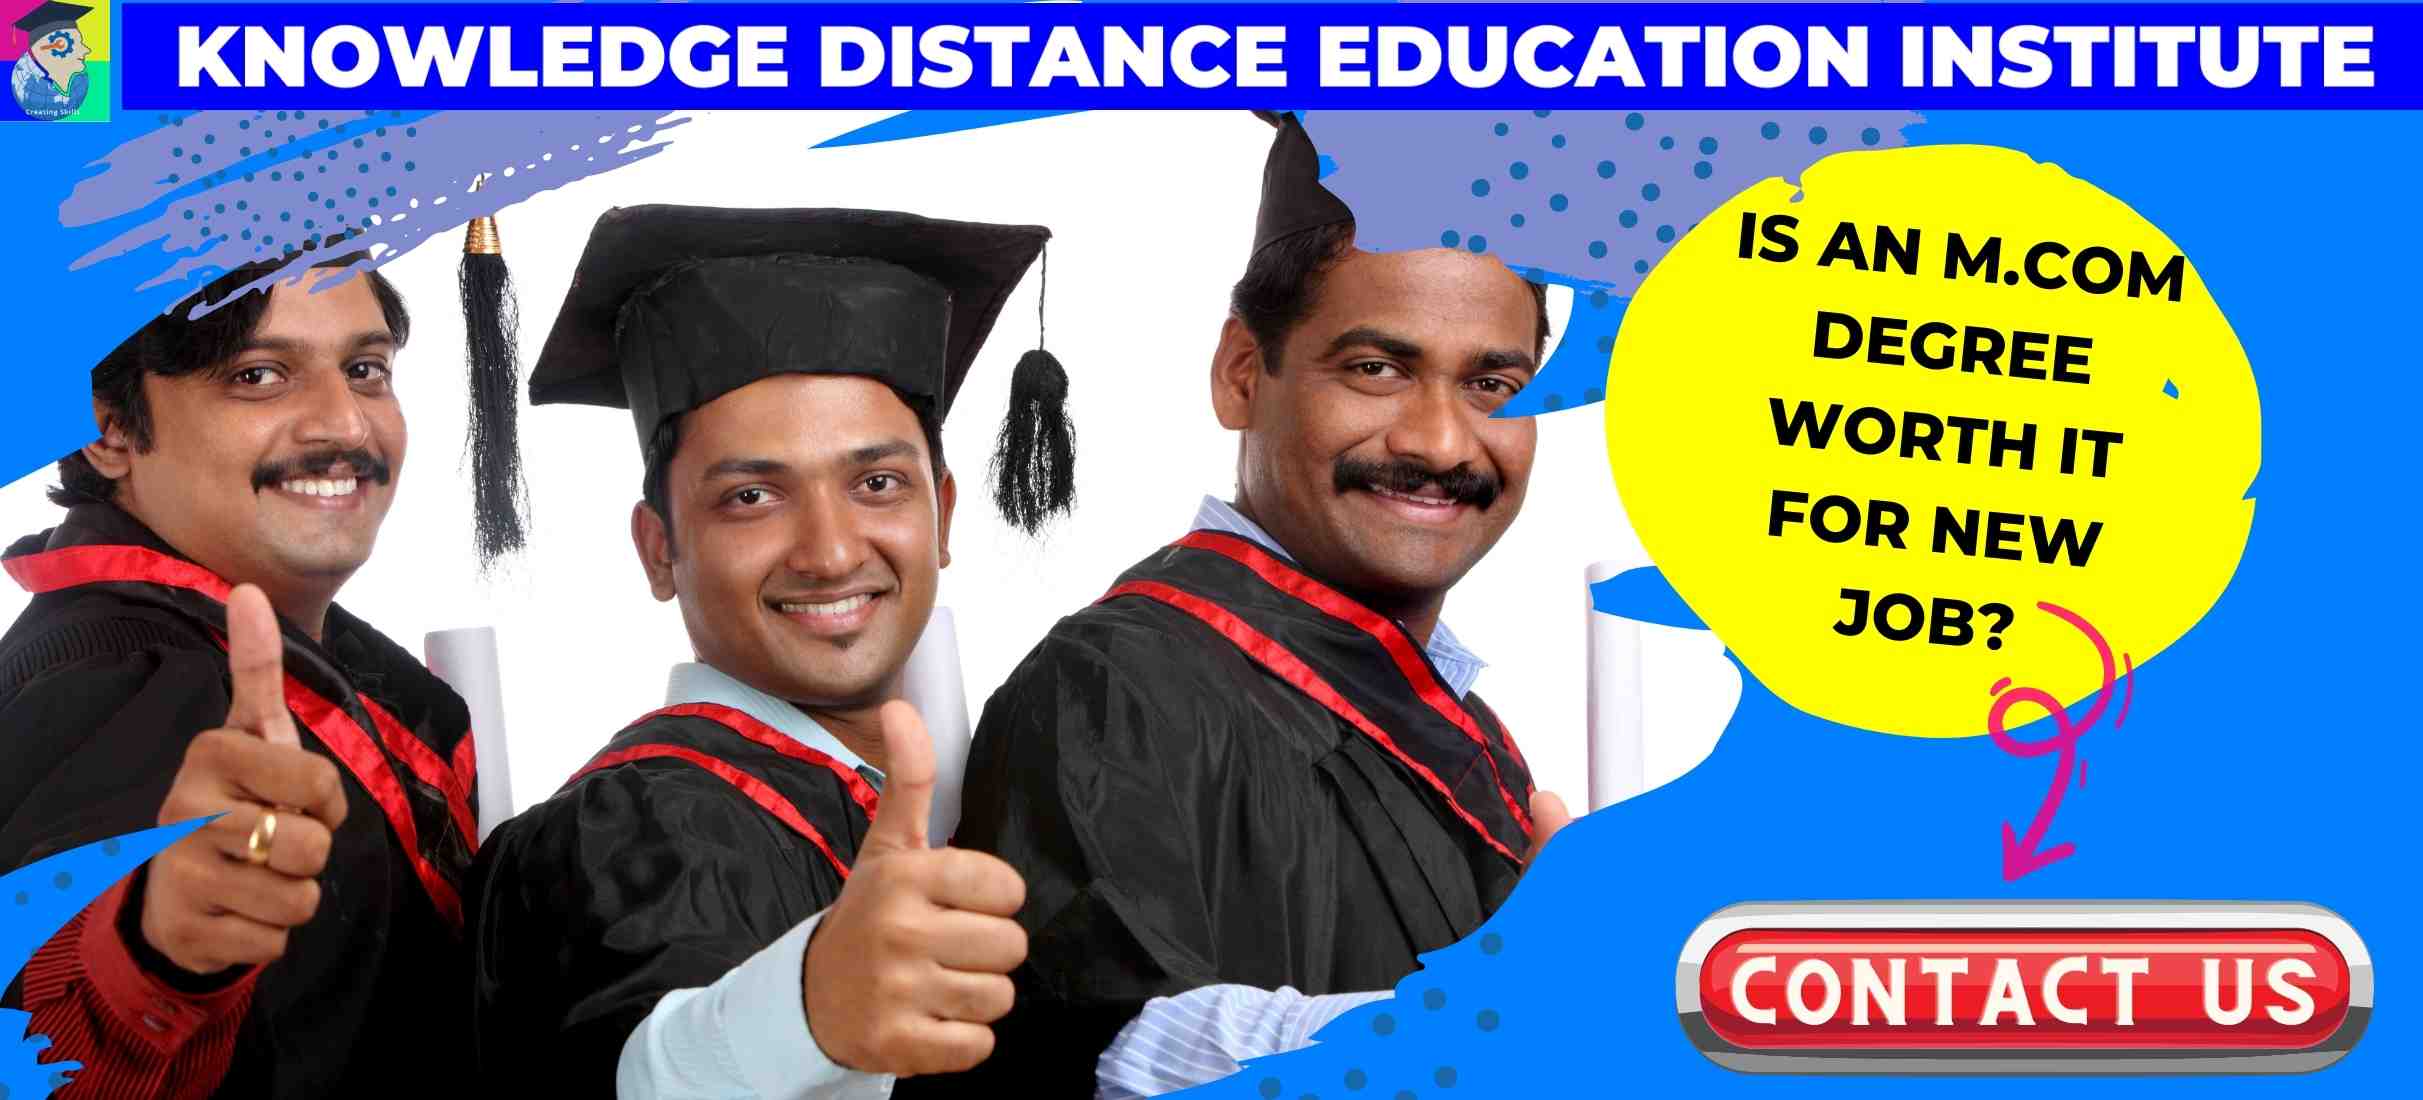 Master Of Commerce - MCOM is 2 years degree course, offered in Distance, Online, Private, or  Regular Learning modes by UGC recognized Universities in India.  For career guidance you may contact Knowedge Distance Education Institute on +91 9029020524